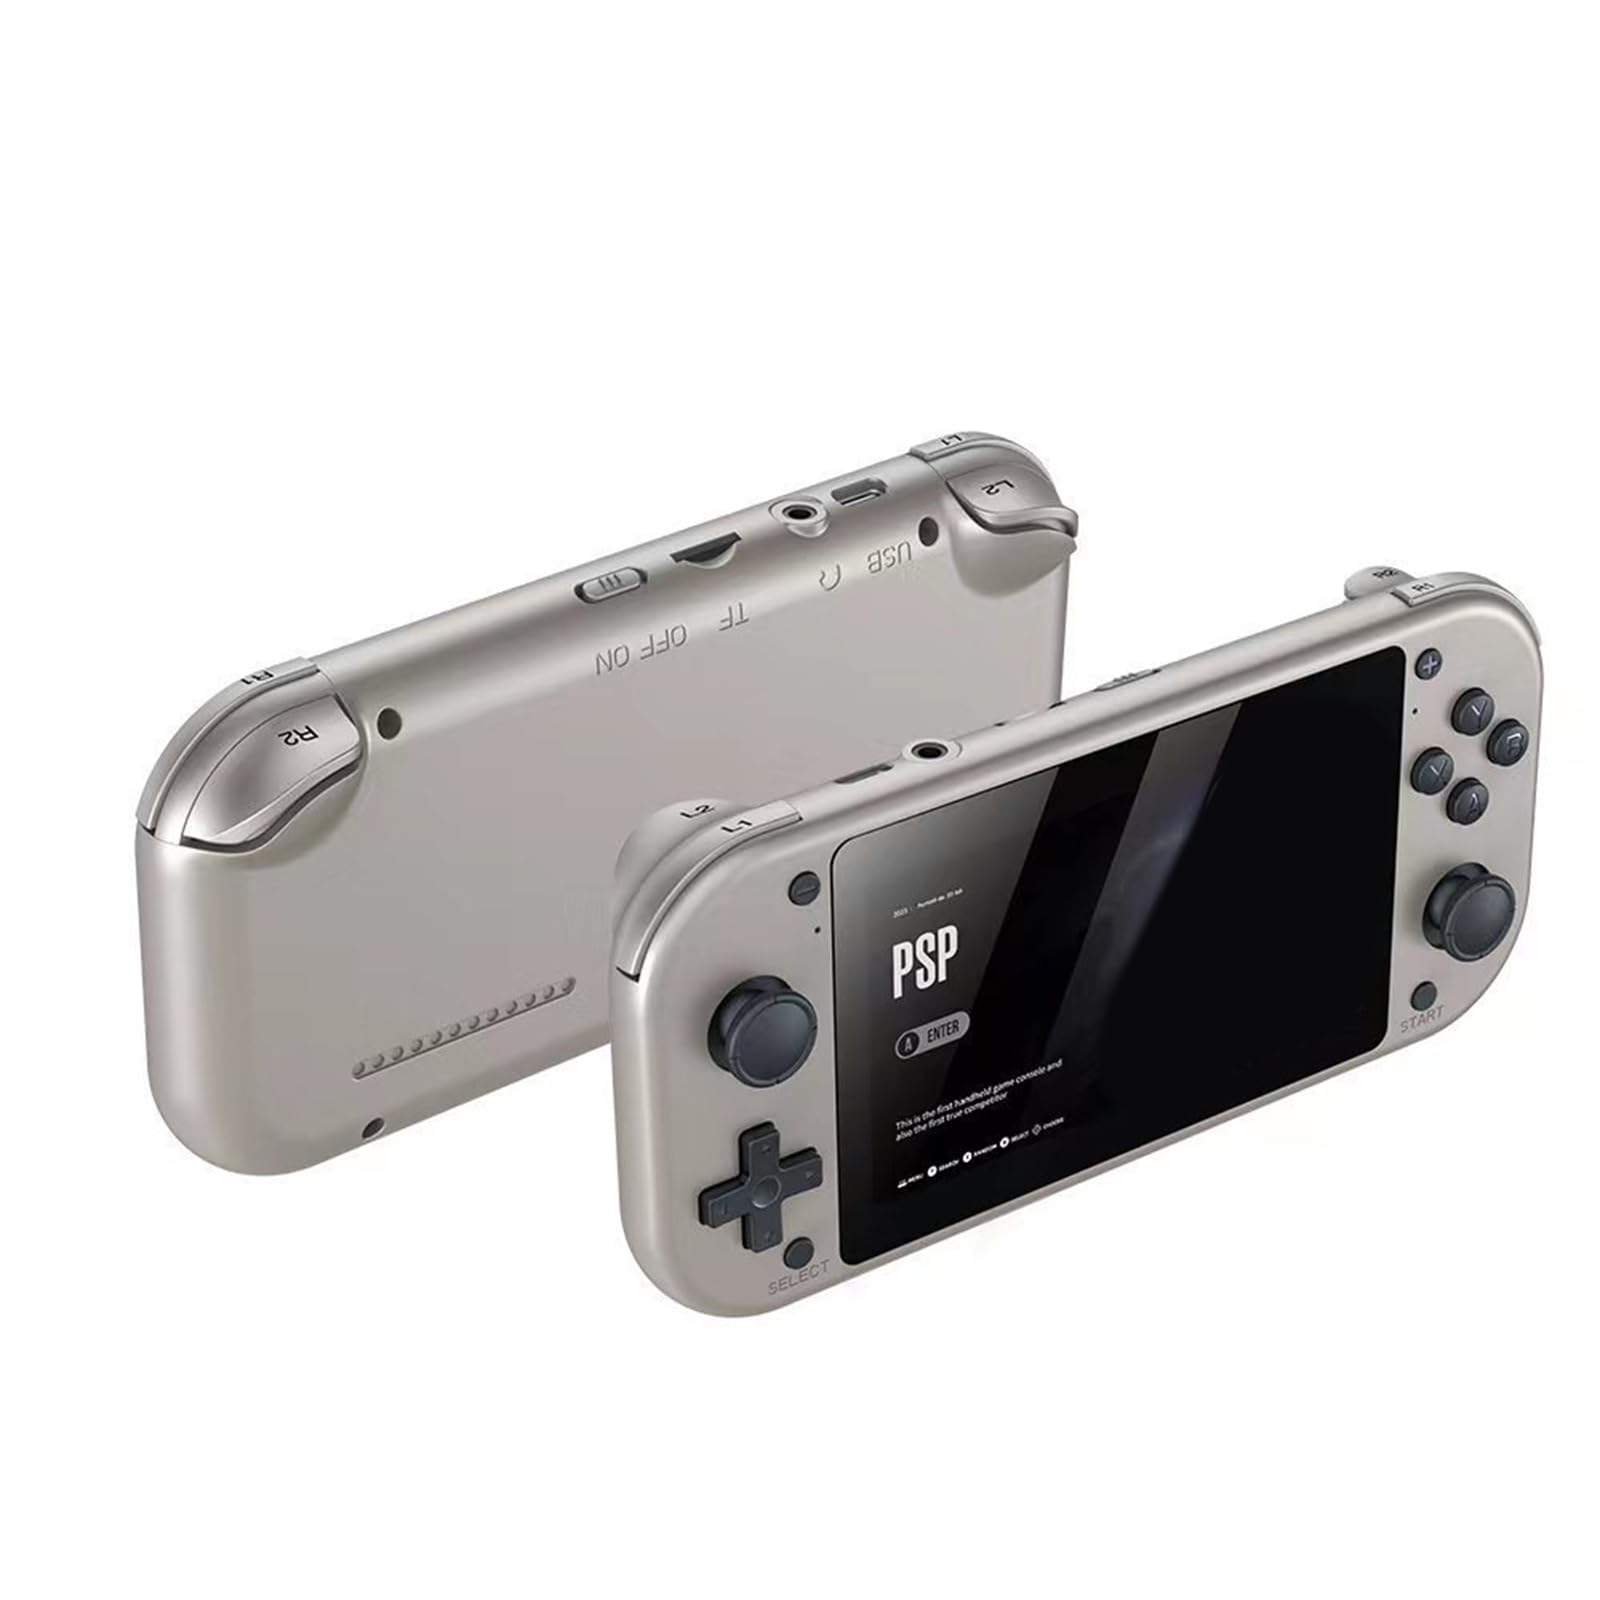 M17 Handheld Game Console Box 4.3 inch Large Screen Game Player Enjoy 30+ Language Selection and 25 Emulators with 4.3 Inch LCD Screen